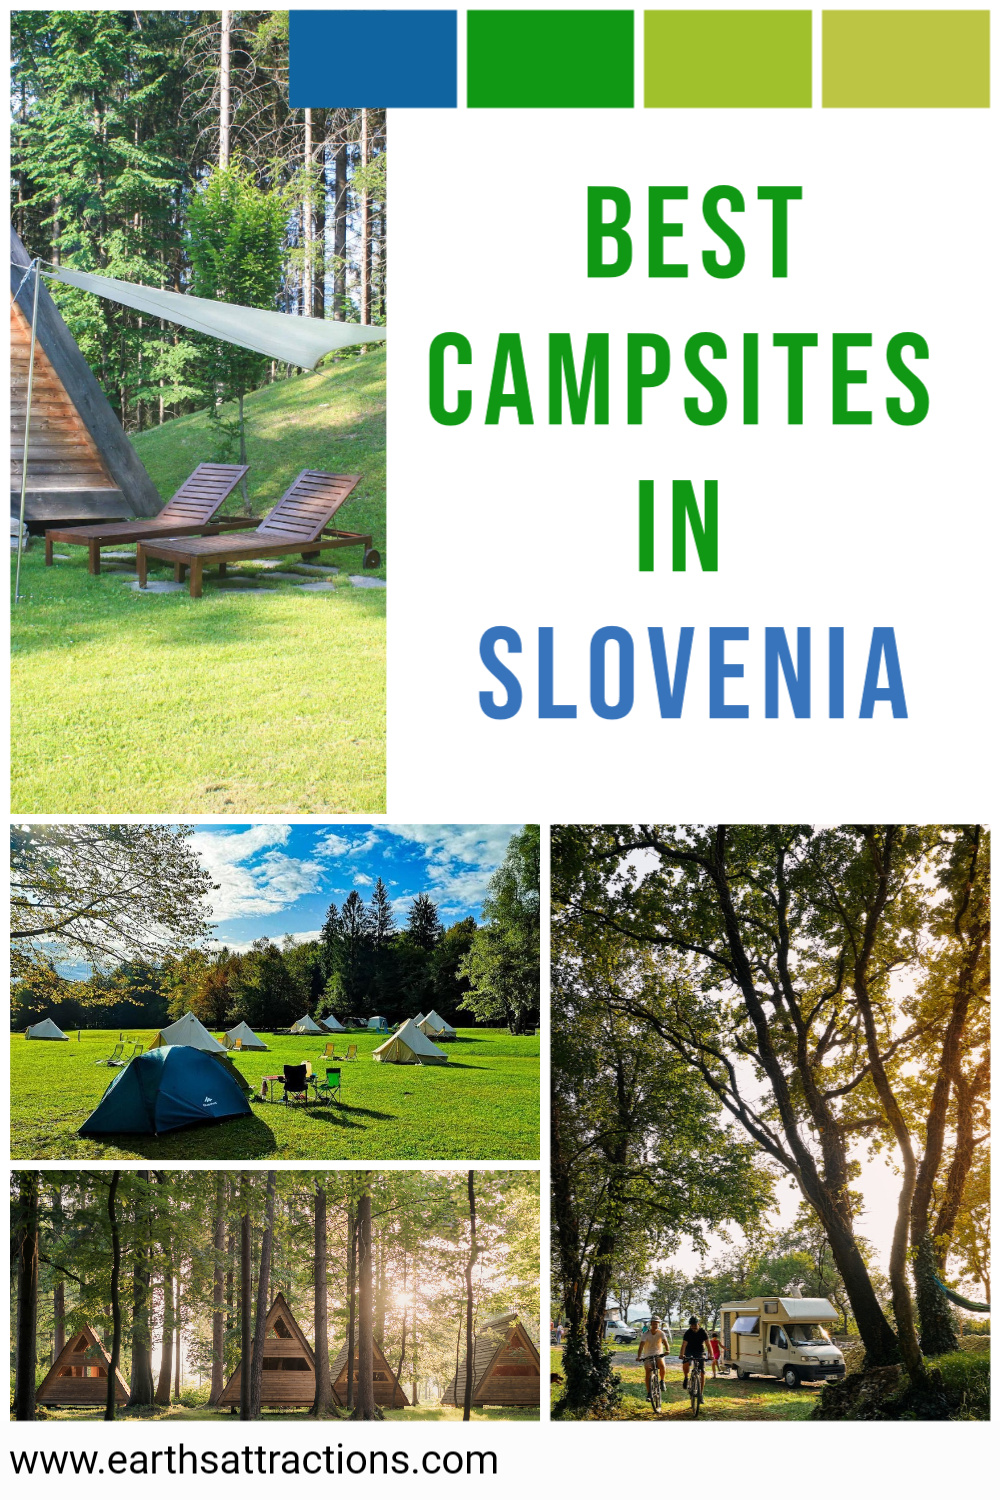 Best campsites in Slovenia! Discover the best places to go camping in Slovenia from an insider! These are the top Slovenia camping spots! #slovenia #europetravel #camping #outdoors #sloveniatravel #sloveniacamping 